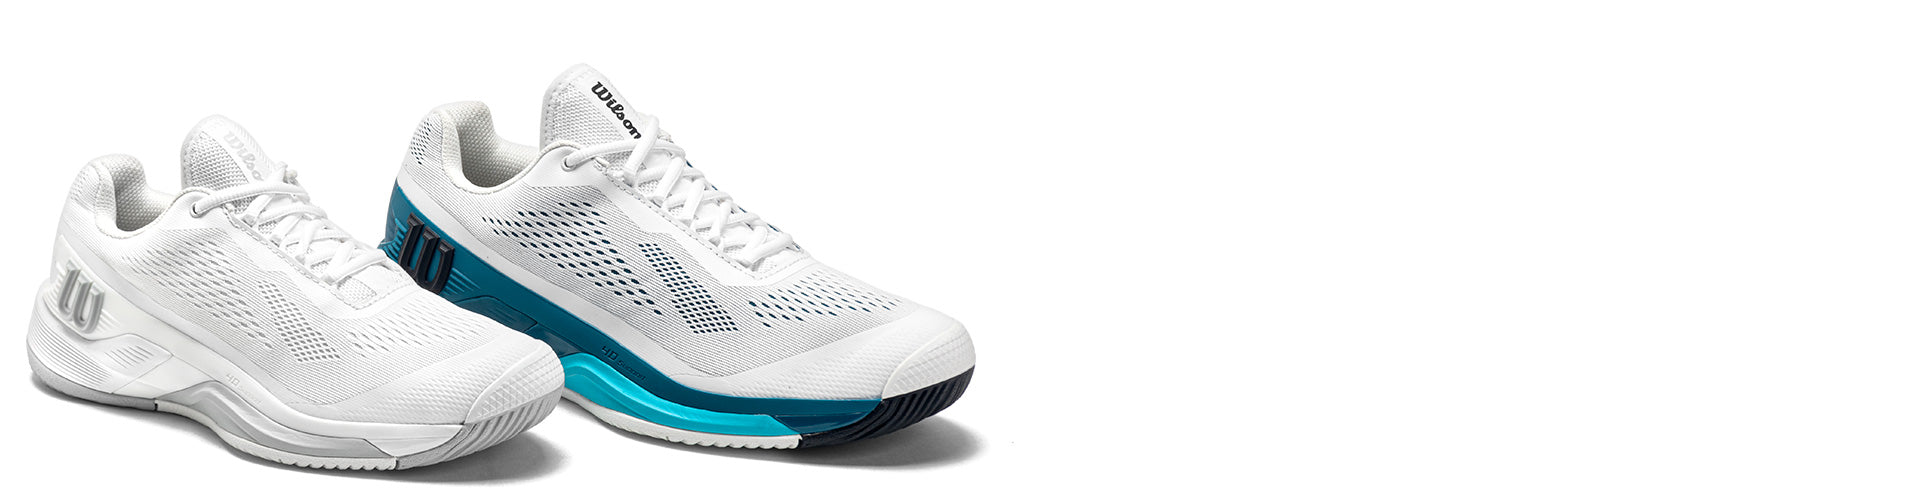 wilson rush pro 4.0 tennis shoes on white background